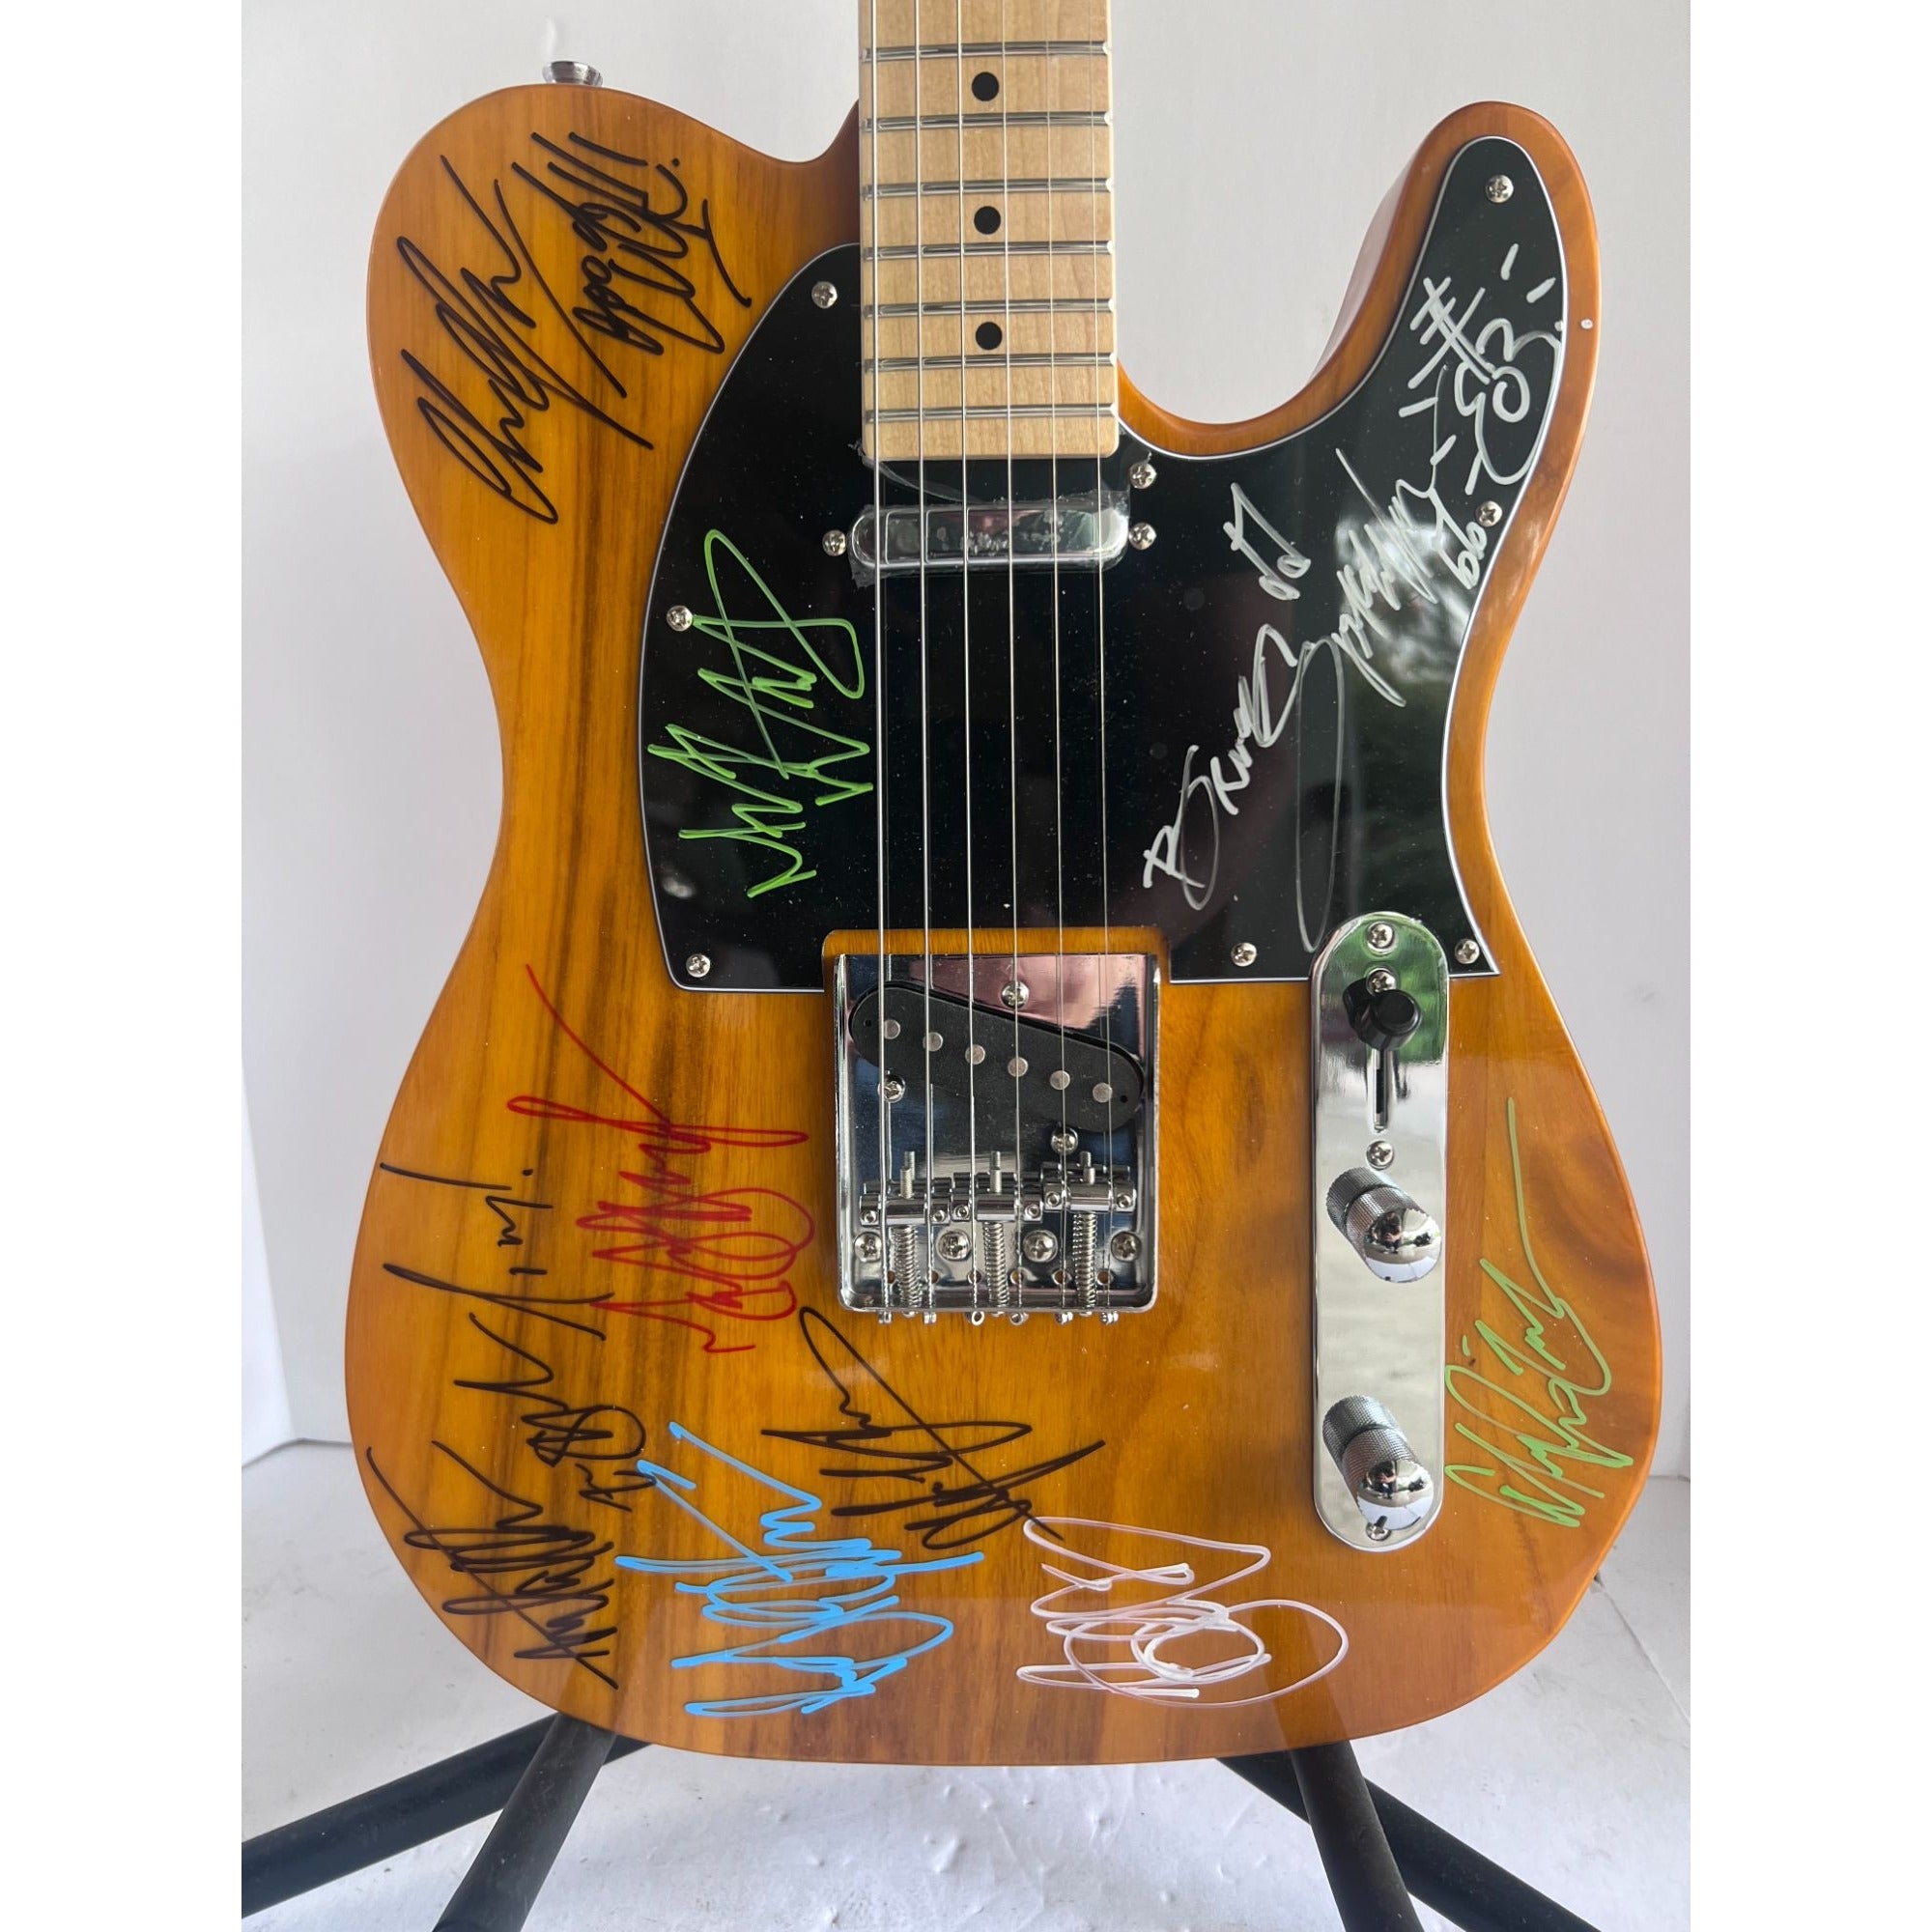 Bruce Springsteen Clarence Clemons Stevie Van Zandt honey Telecaster electric guitar signed with proof just like Bruce plays